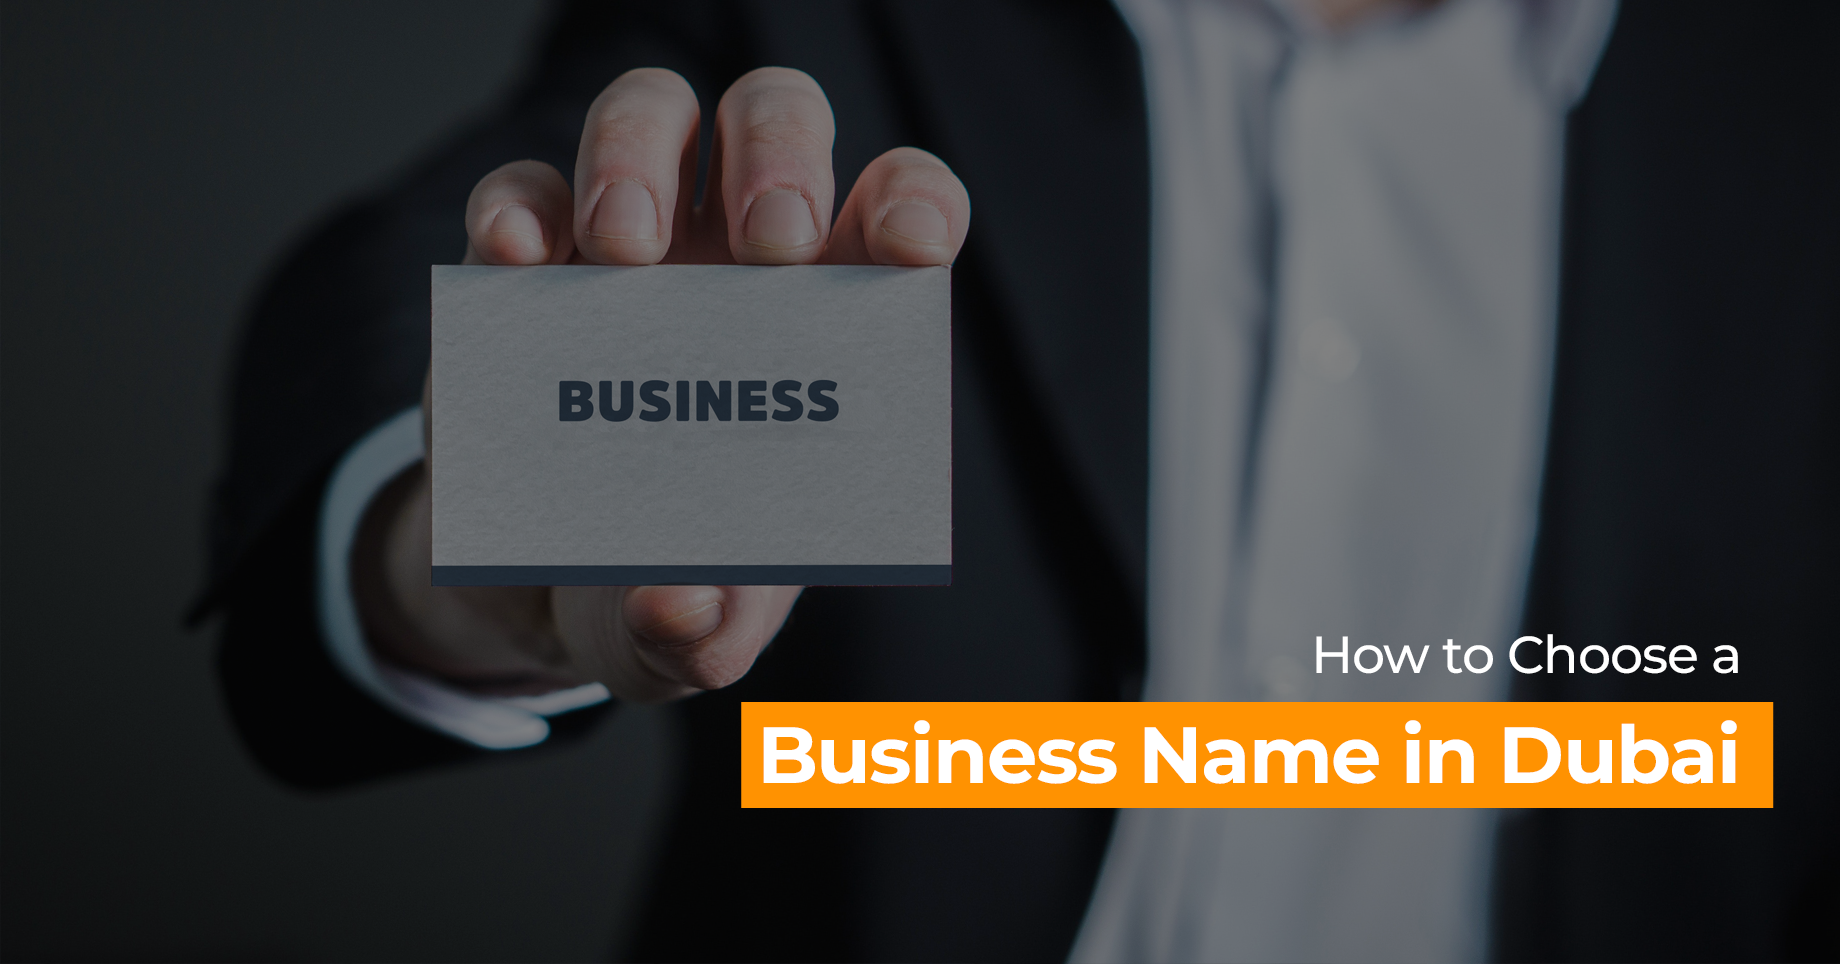 How to Choose a Business Name in Dubai